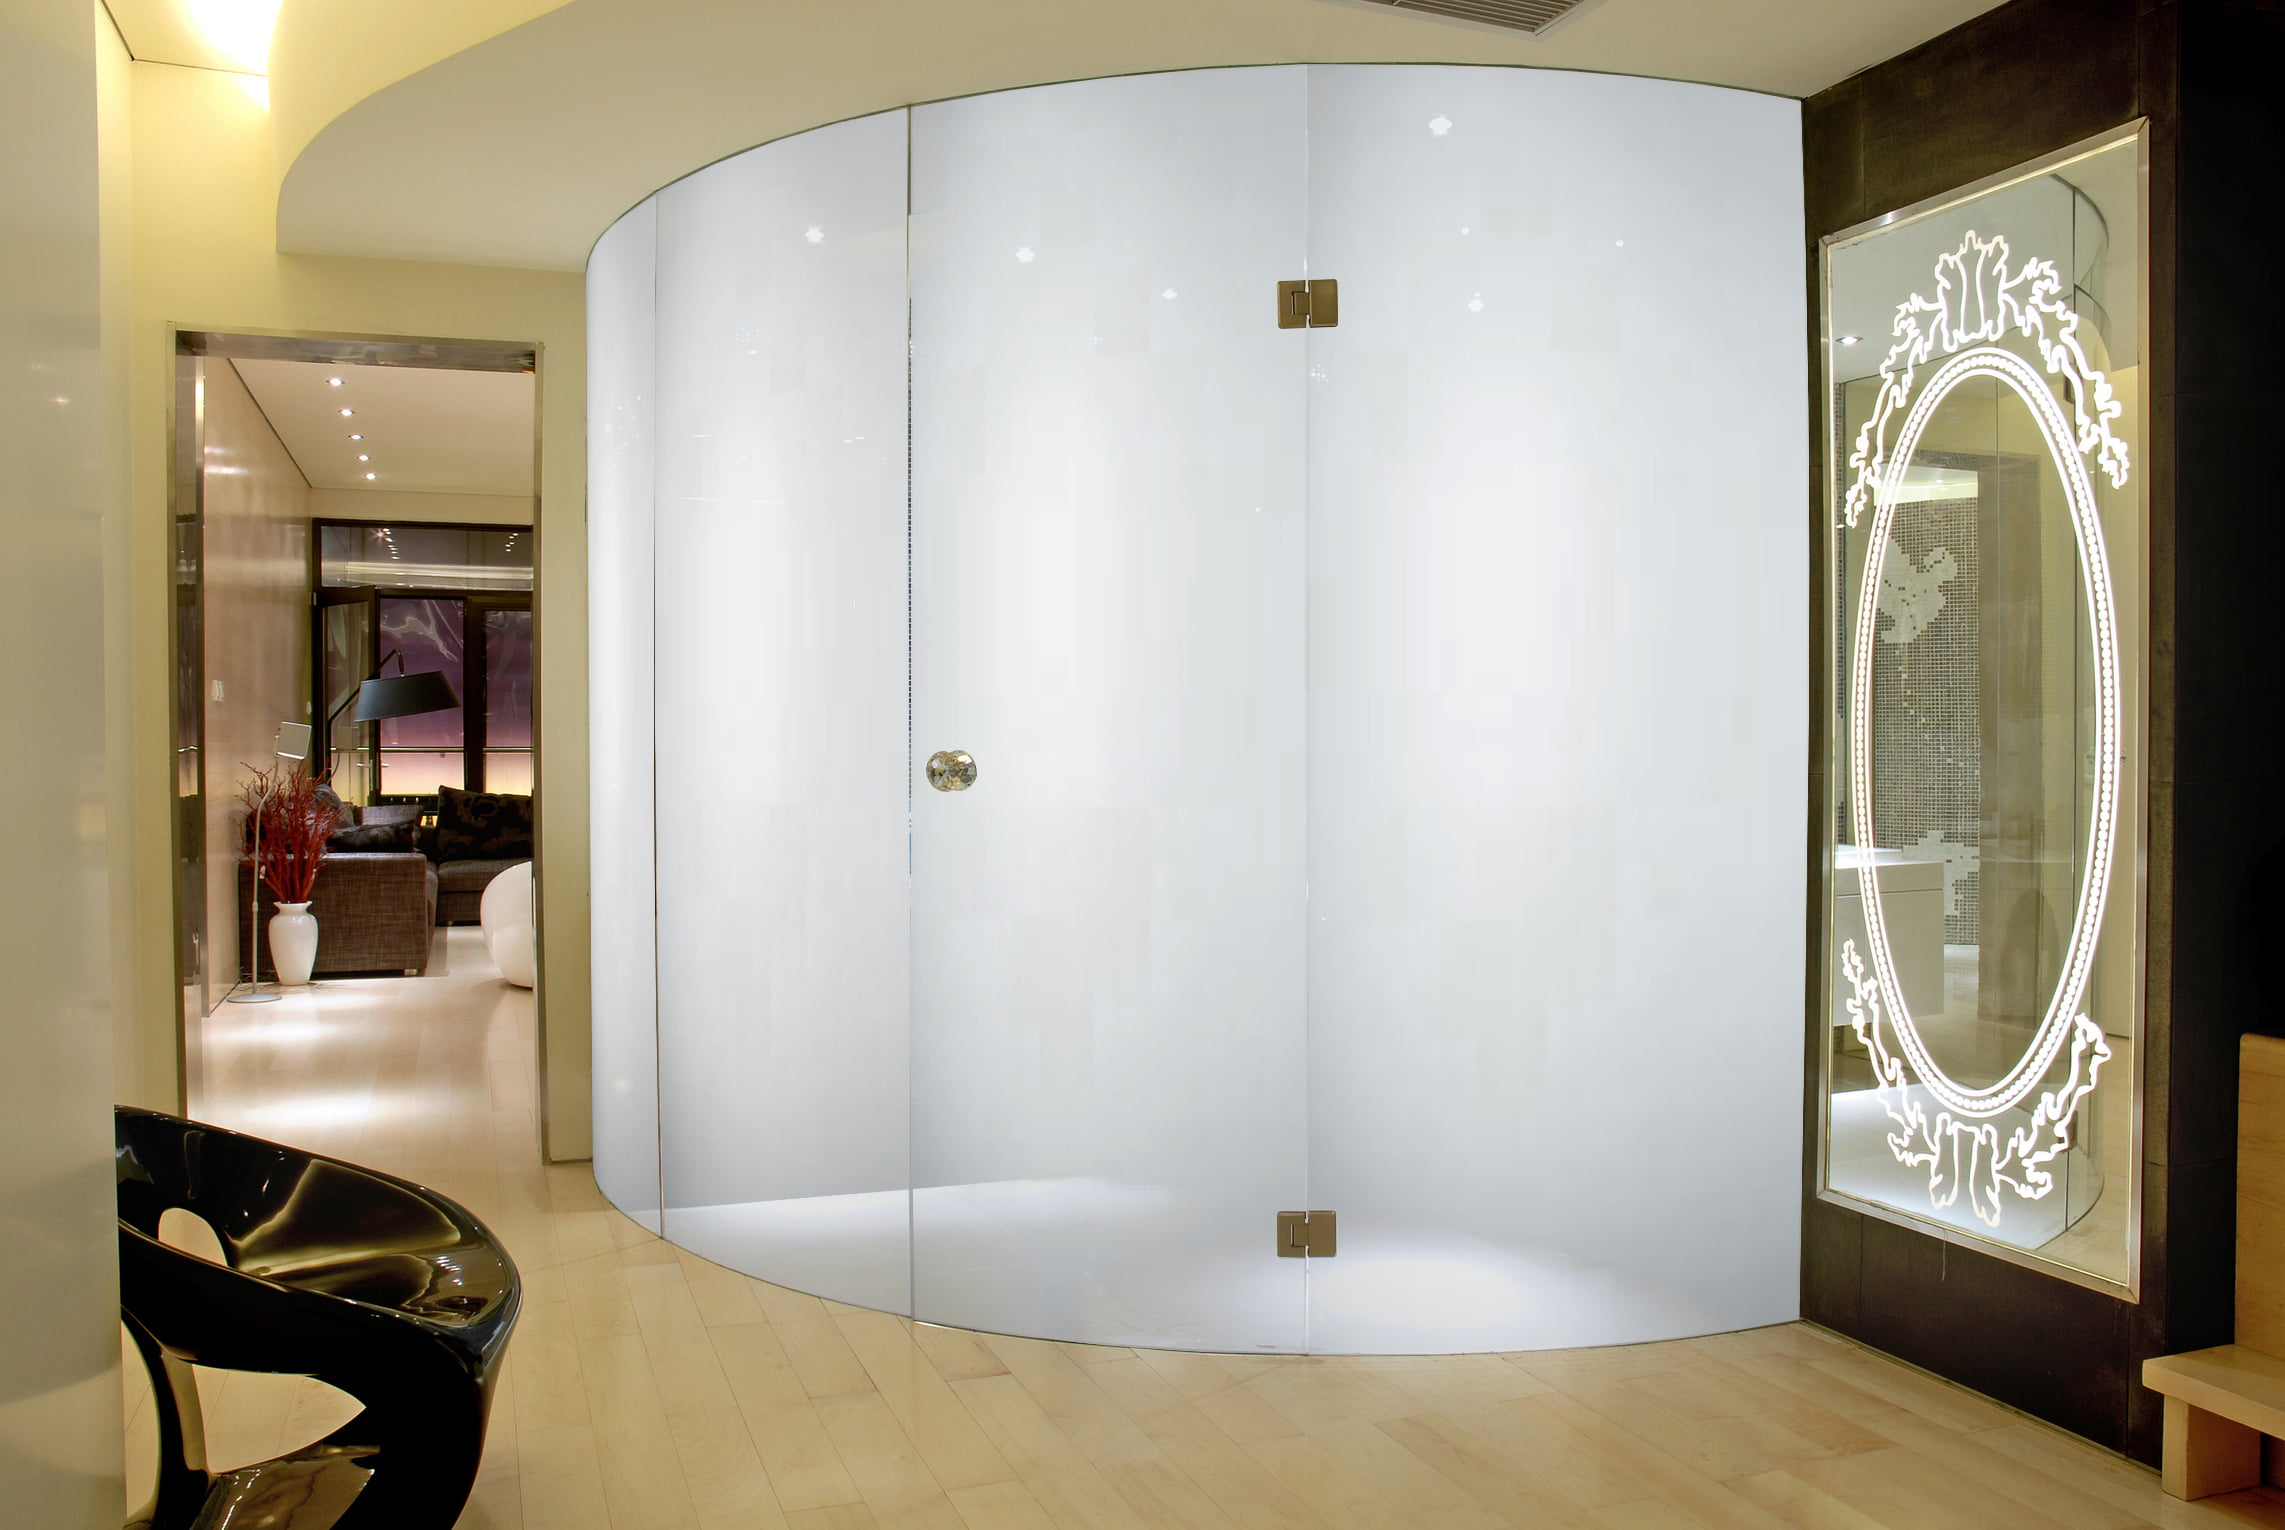 Switchable glass partitions